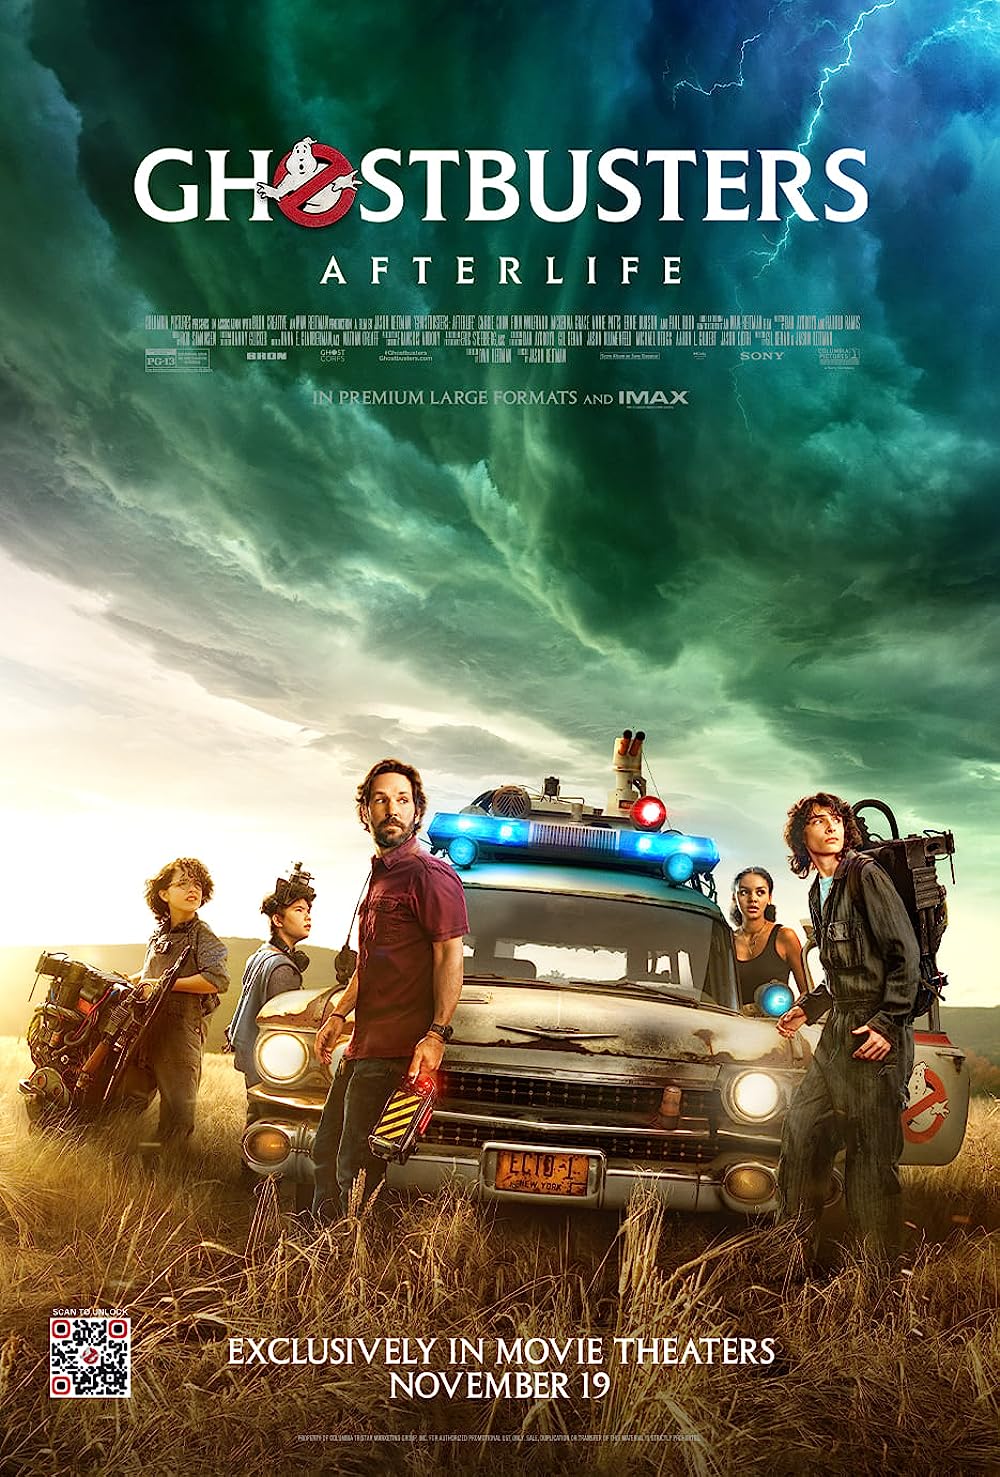 GHOSTBUSTERS AFTERLIFE 2021 HD VUDU/iTunes Via Moviesanywhere